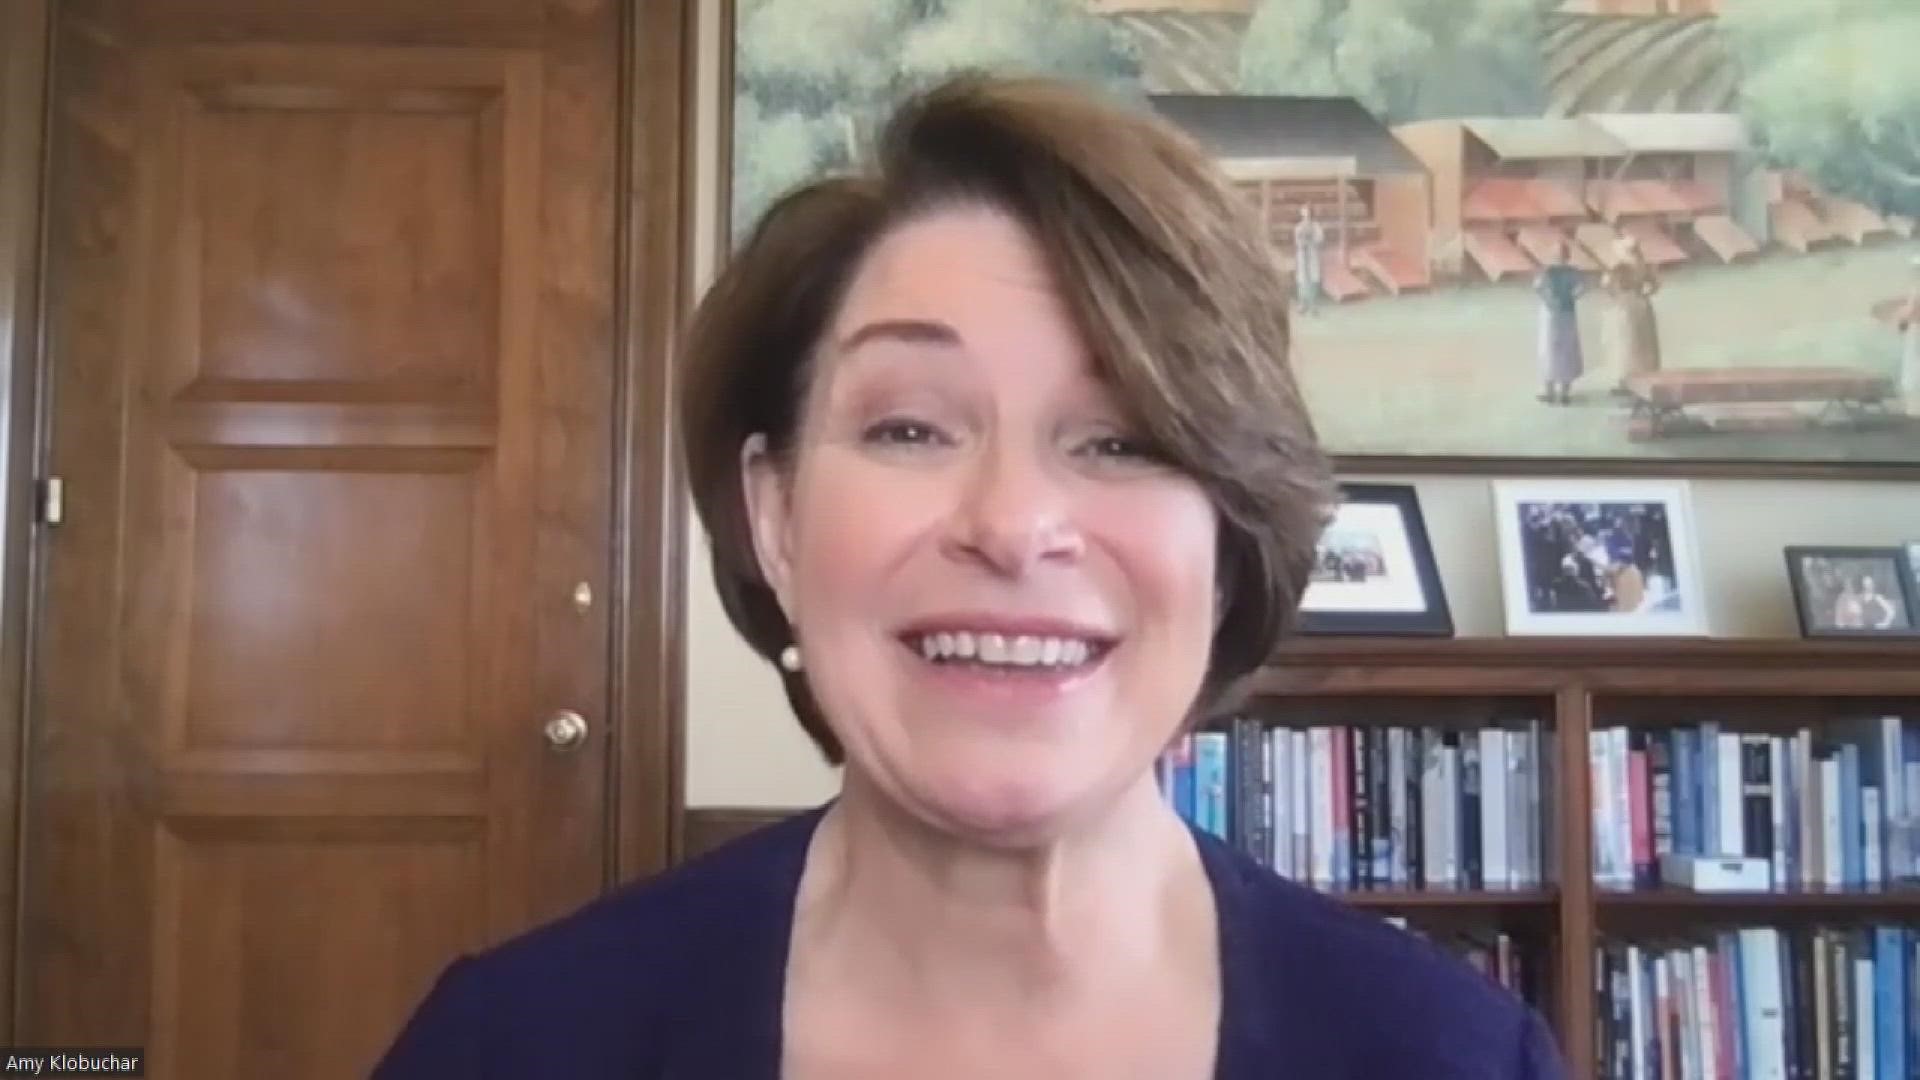 Sen. Amy Klobuchar reflects on former Vice President Walter Mondale. Sen. Klobuchar will be among the speakers at the Mondale memorial service at the U of M on May 1